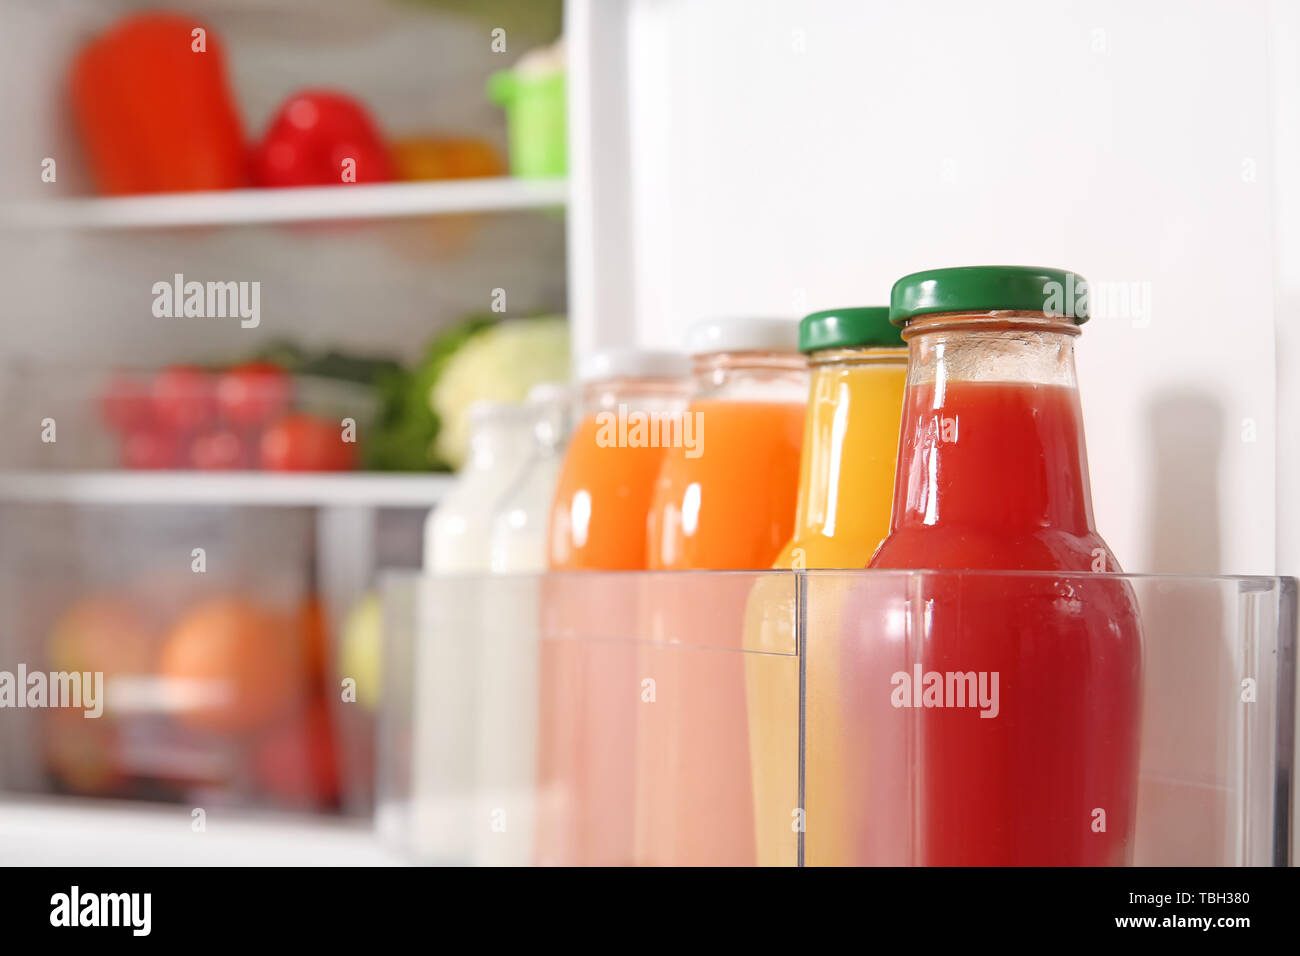 https://c8.alamy.com/comp/TBH380/bottles-with-milk-and-juice-in-open-fridge-TBH380.jpg